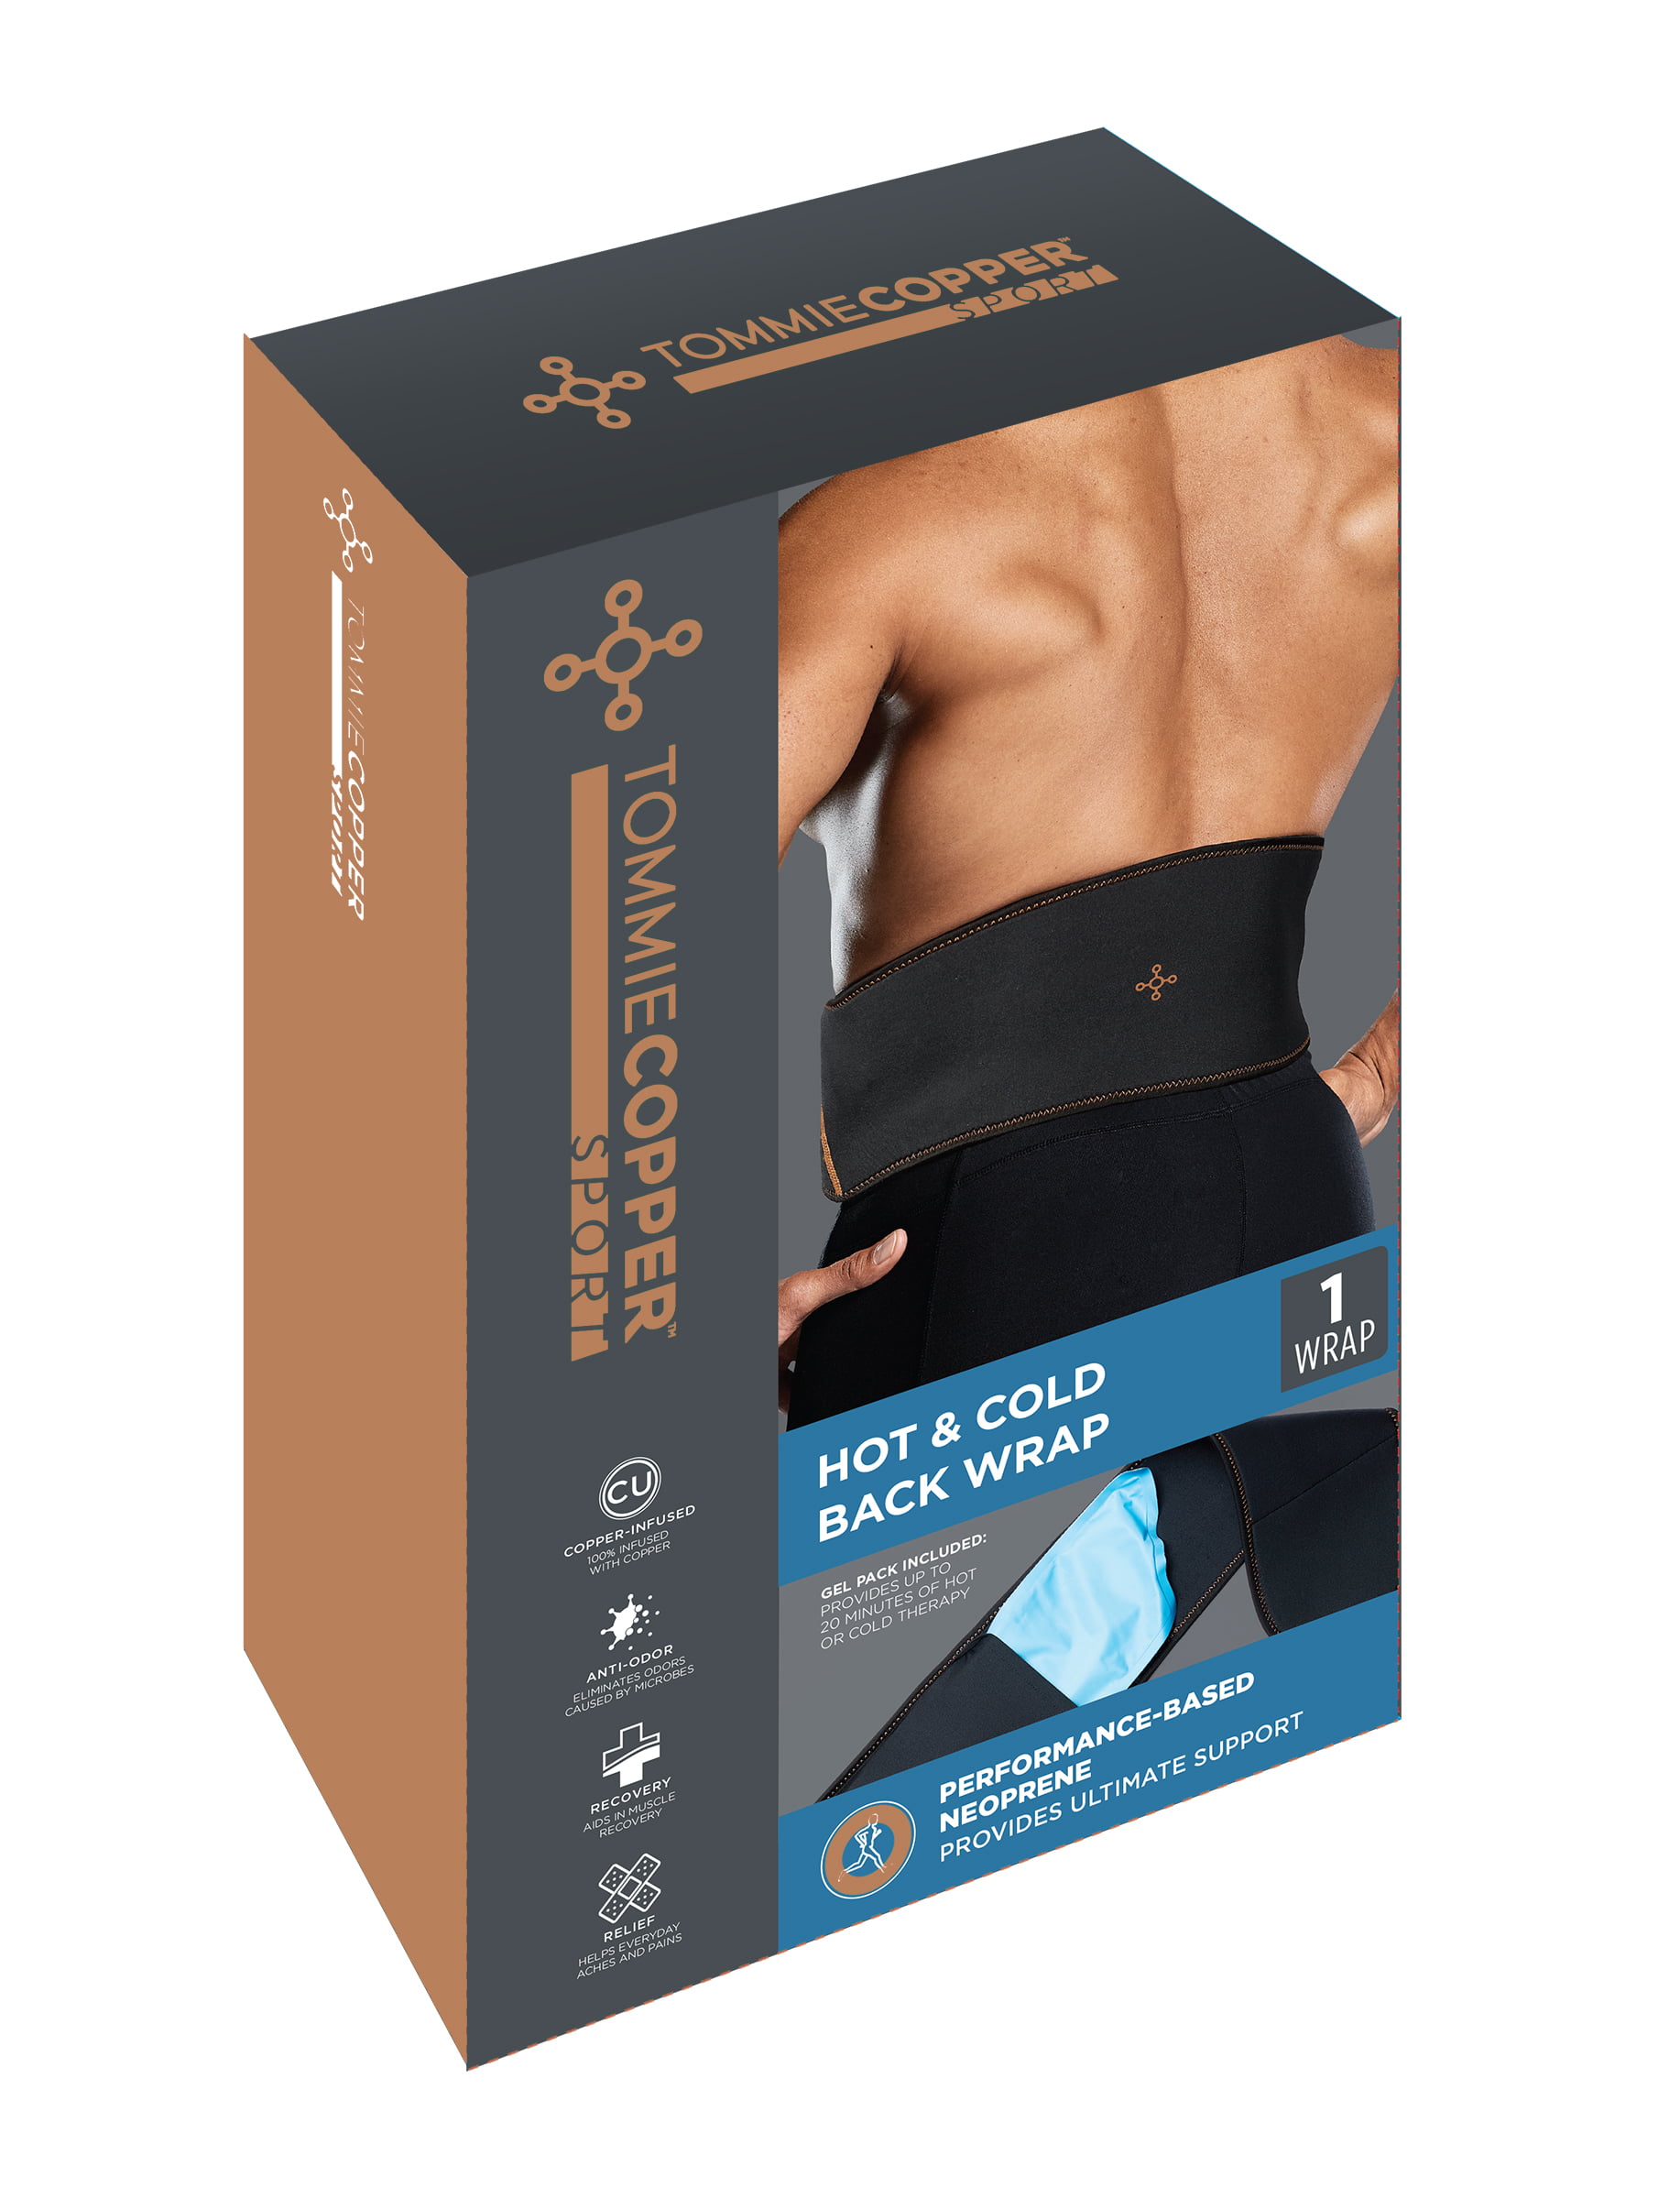 Tommie Copper Sport Hot and Cold Compression Back Wrap, Black, One Size,  Brace